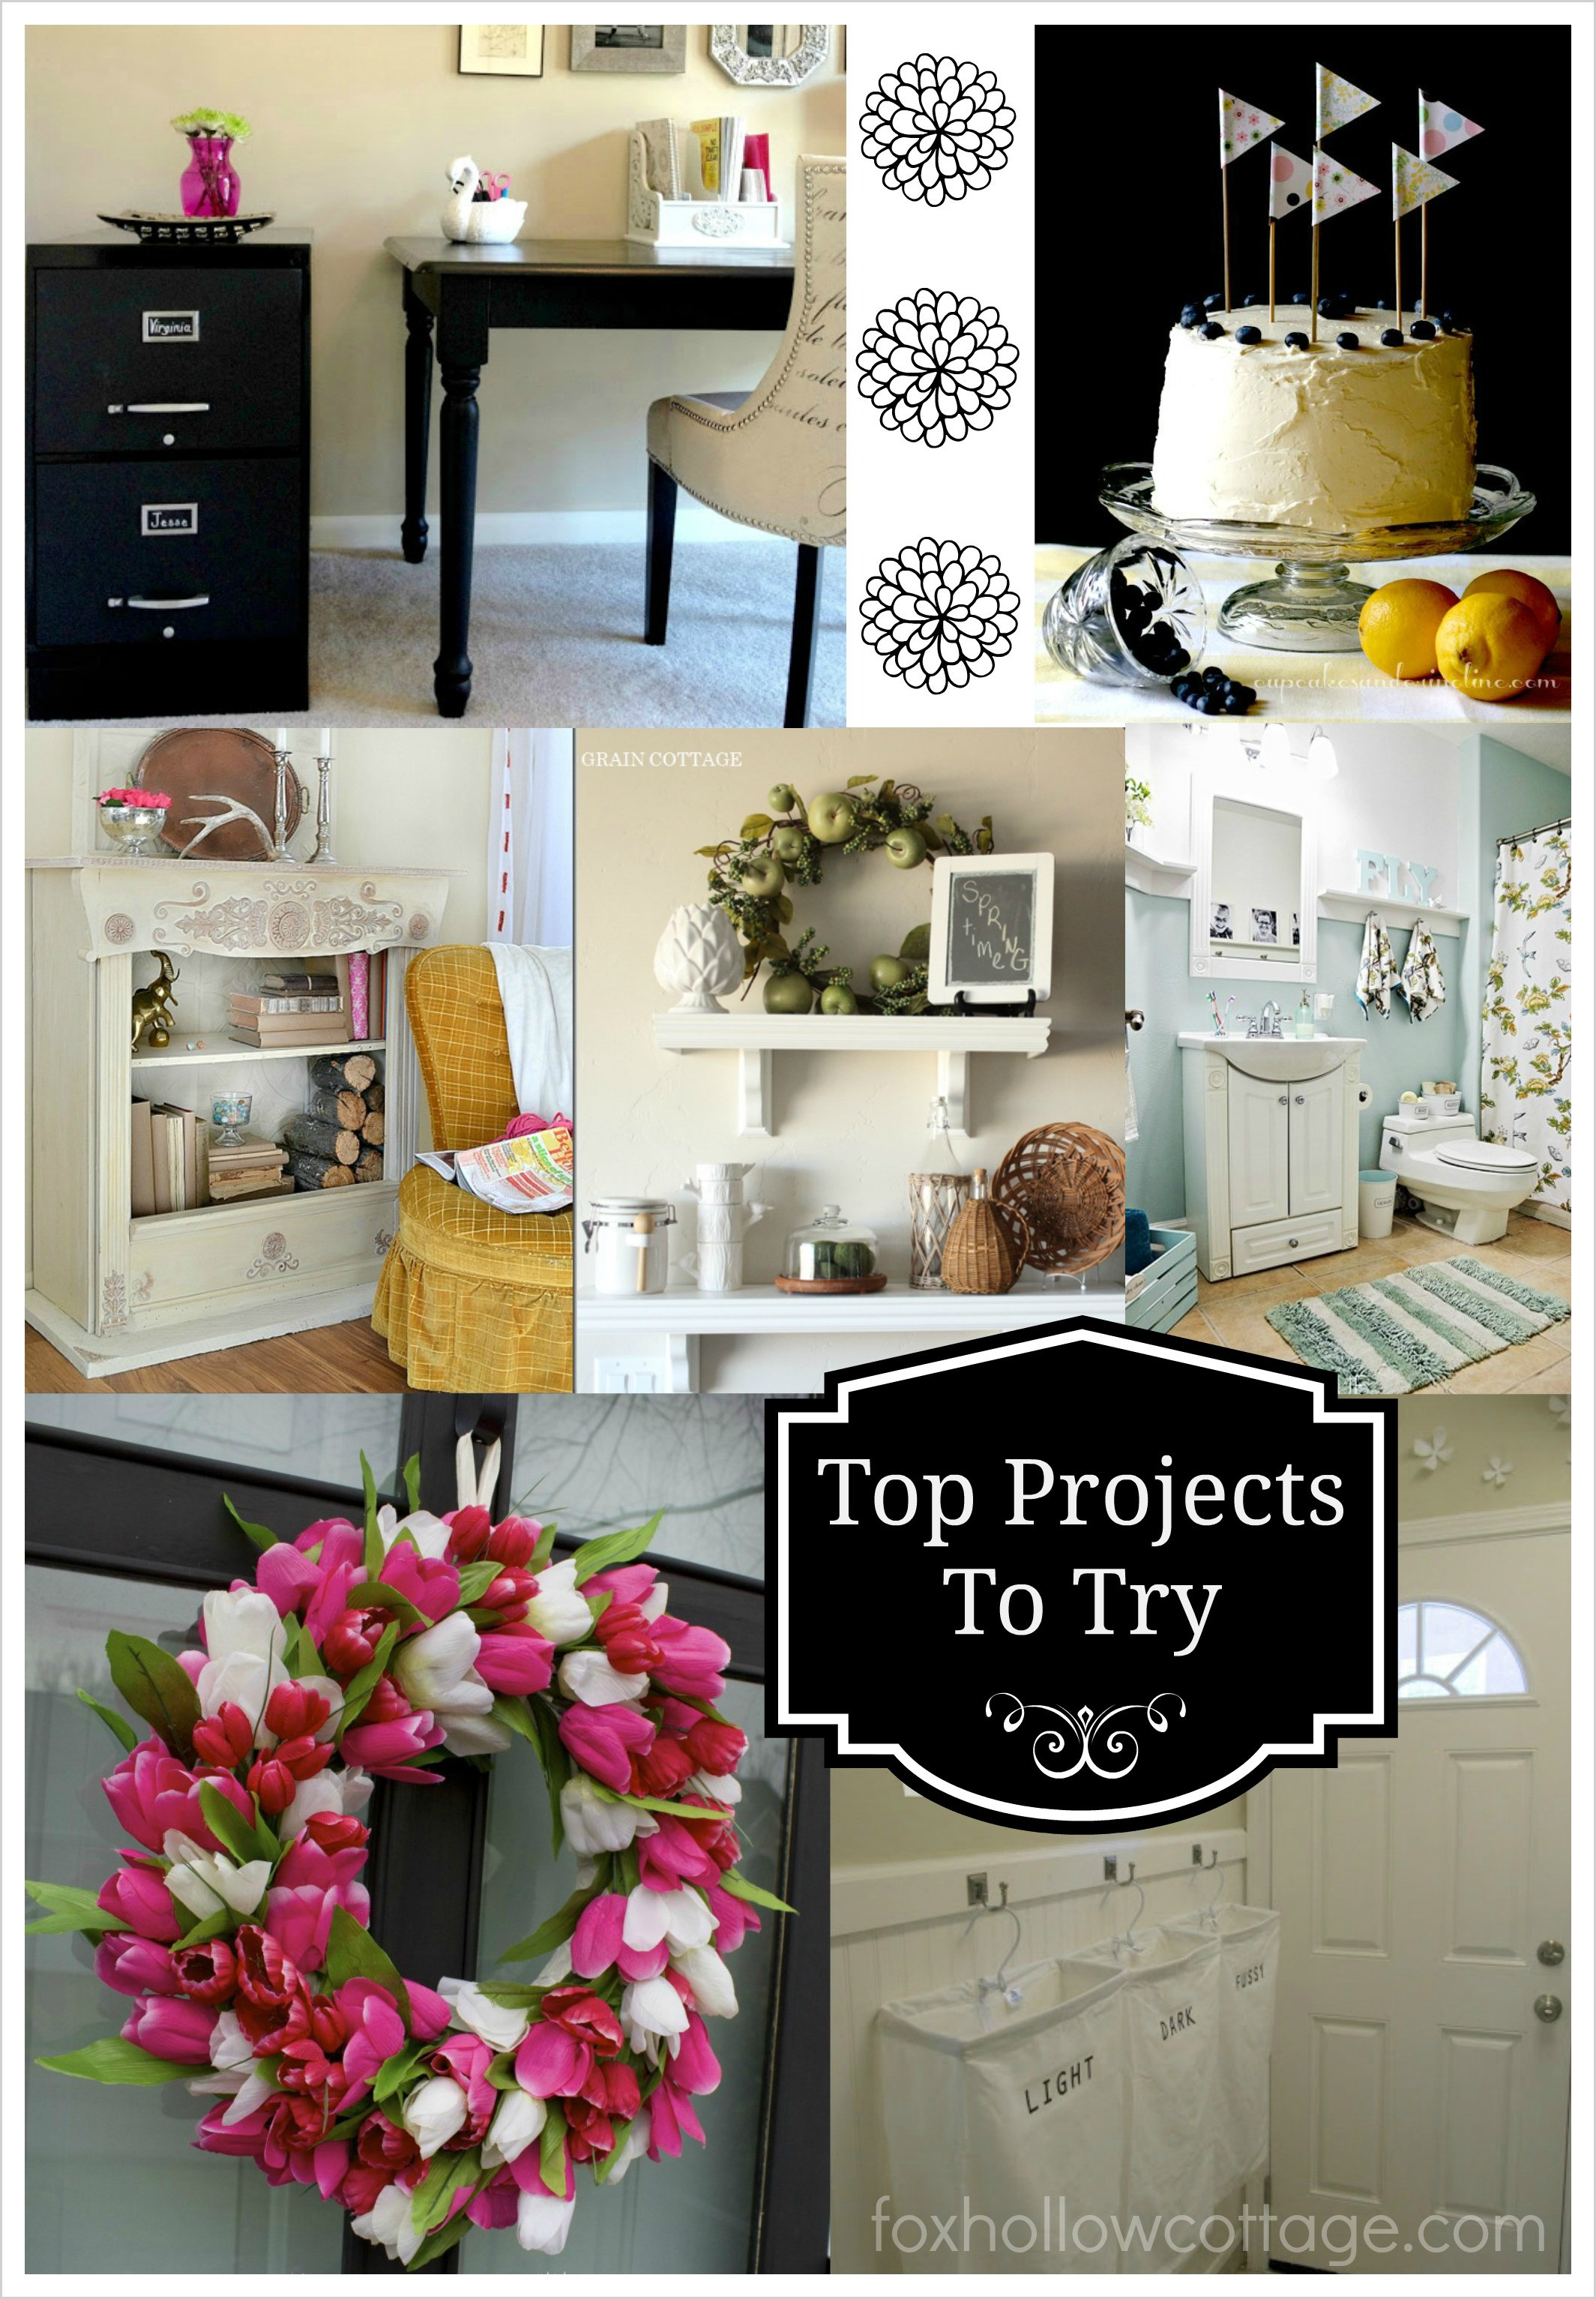 Pinterest Home Decorating DIY
 Power Pinterest Link Party and Friday Fav Features 